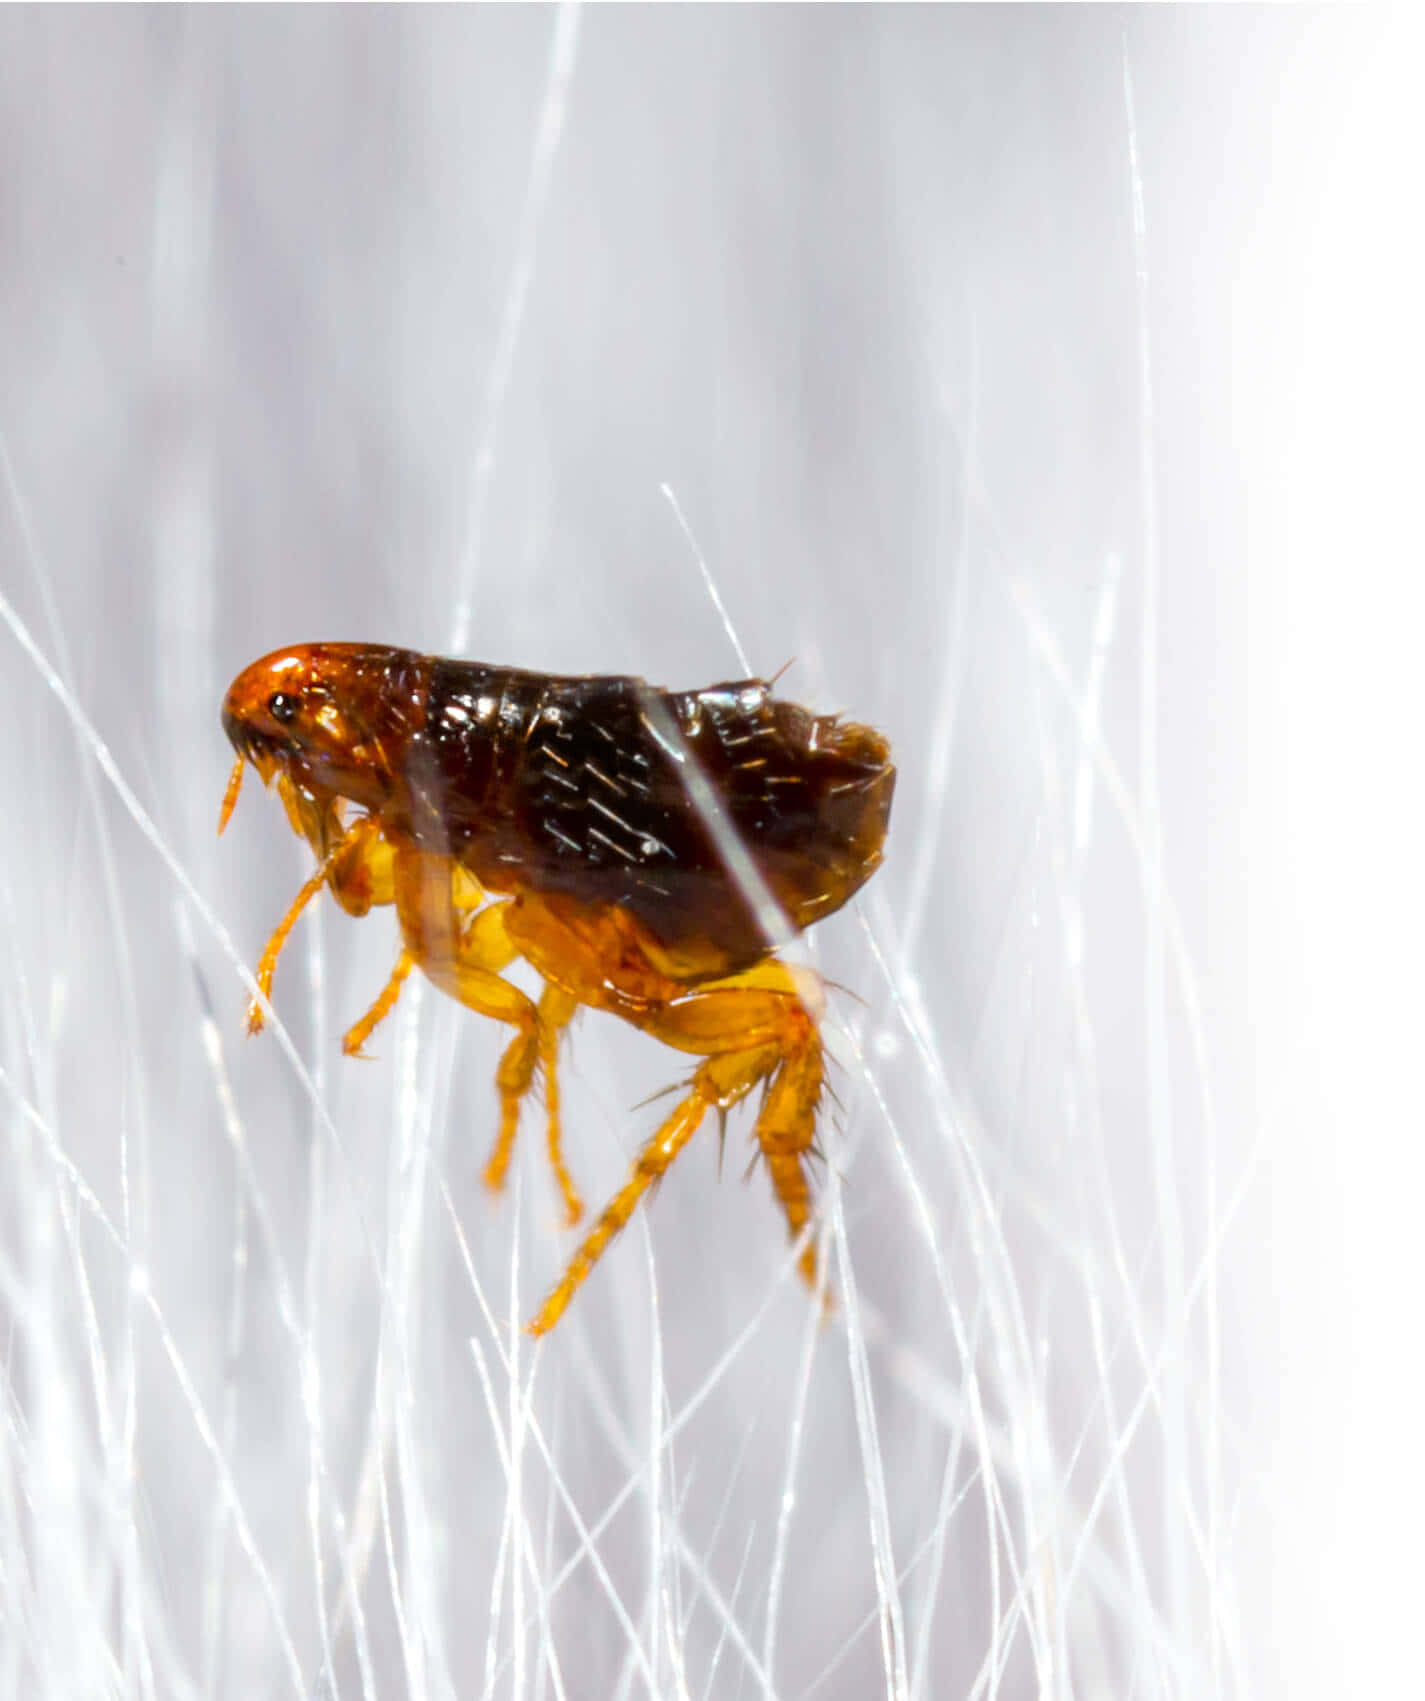 A Small Brown And Orange Bug On A White Background